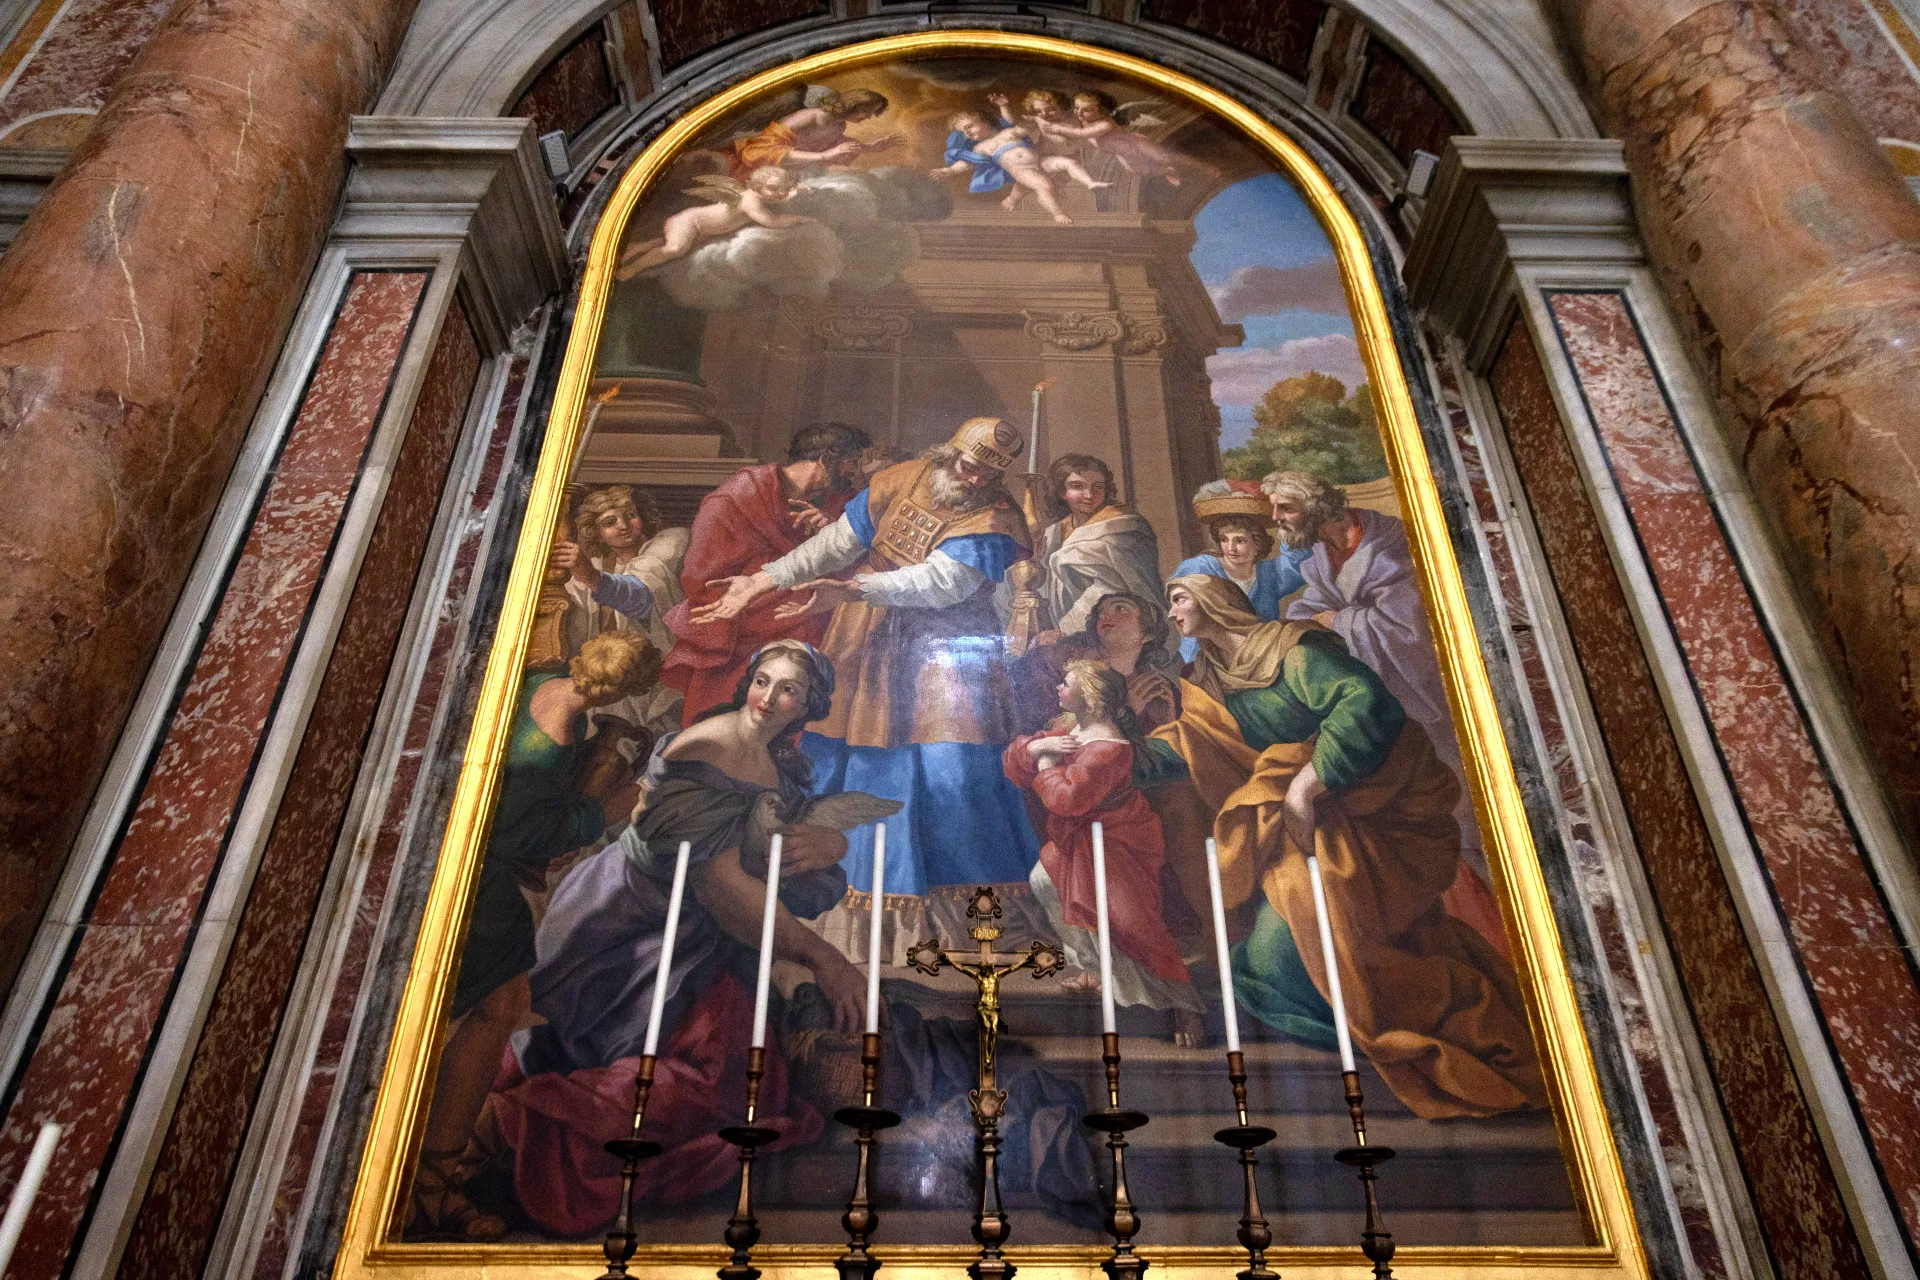 A mosaic altarpiece of the Presentation of the Virgin Mary in the Temple can be found above the tomb of Pope St. Pius X near the left-front entrance of the basilica. Daniel Ibañez/CNA